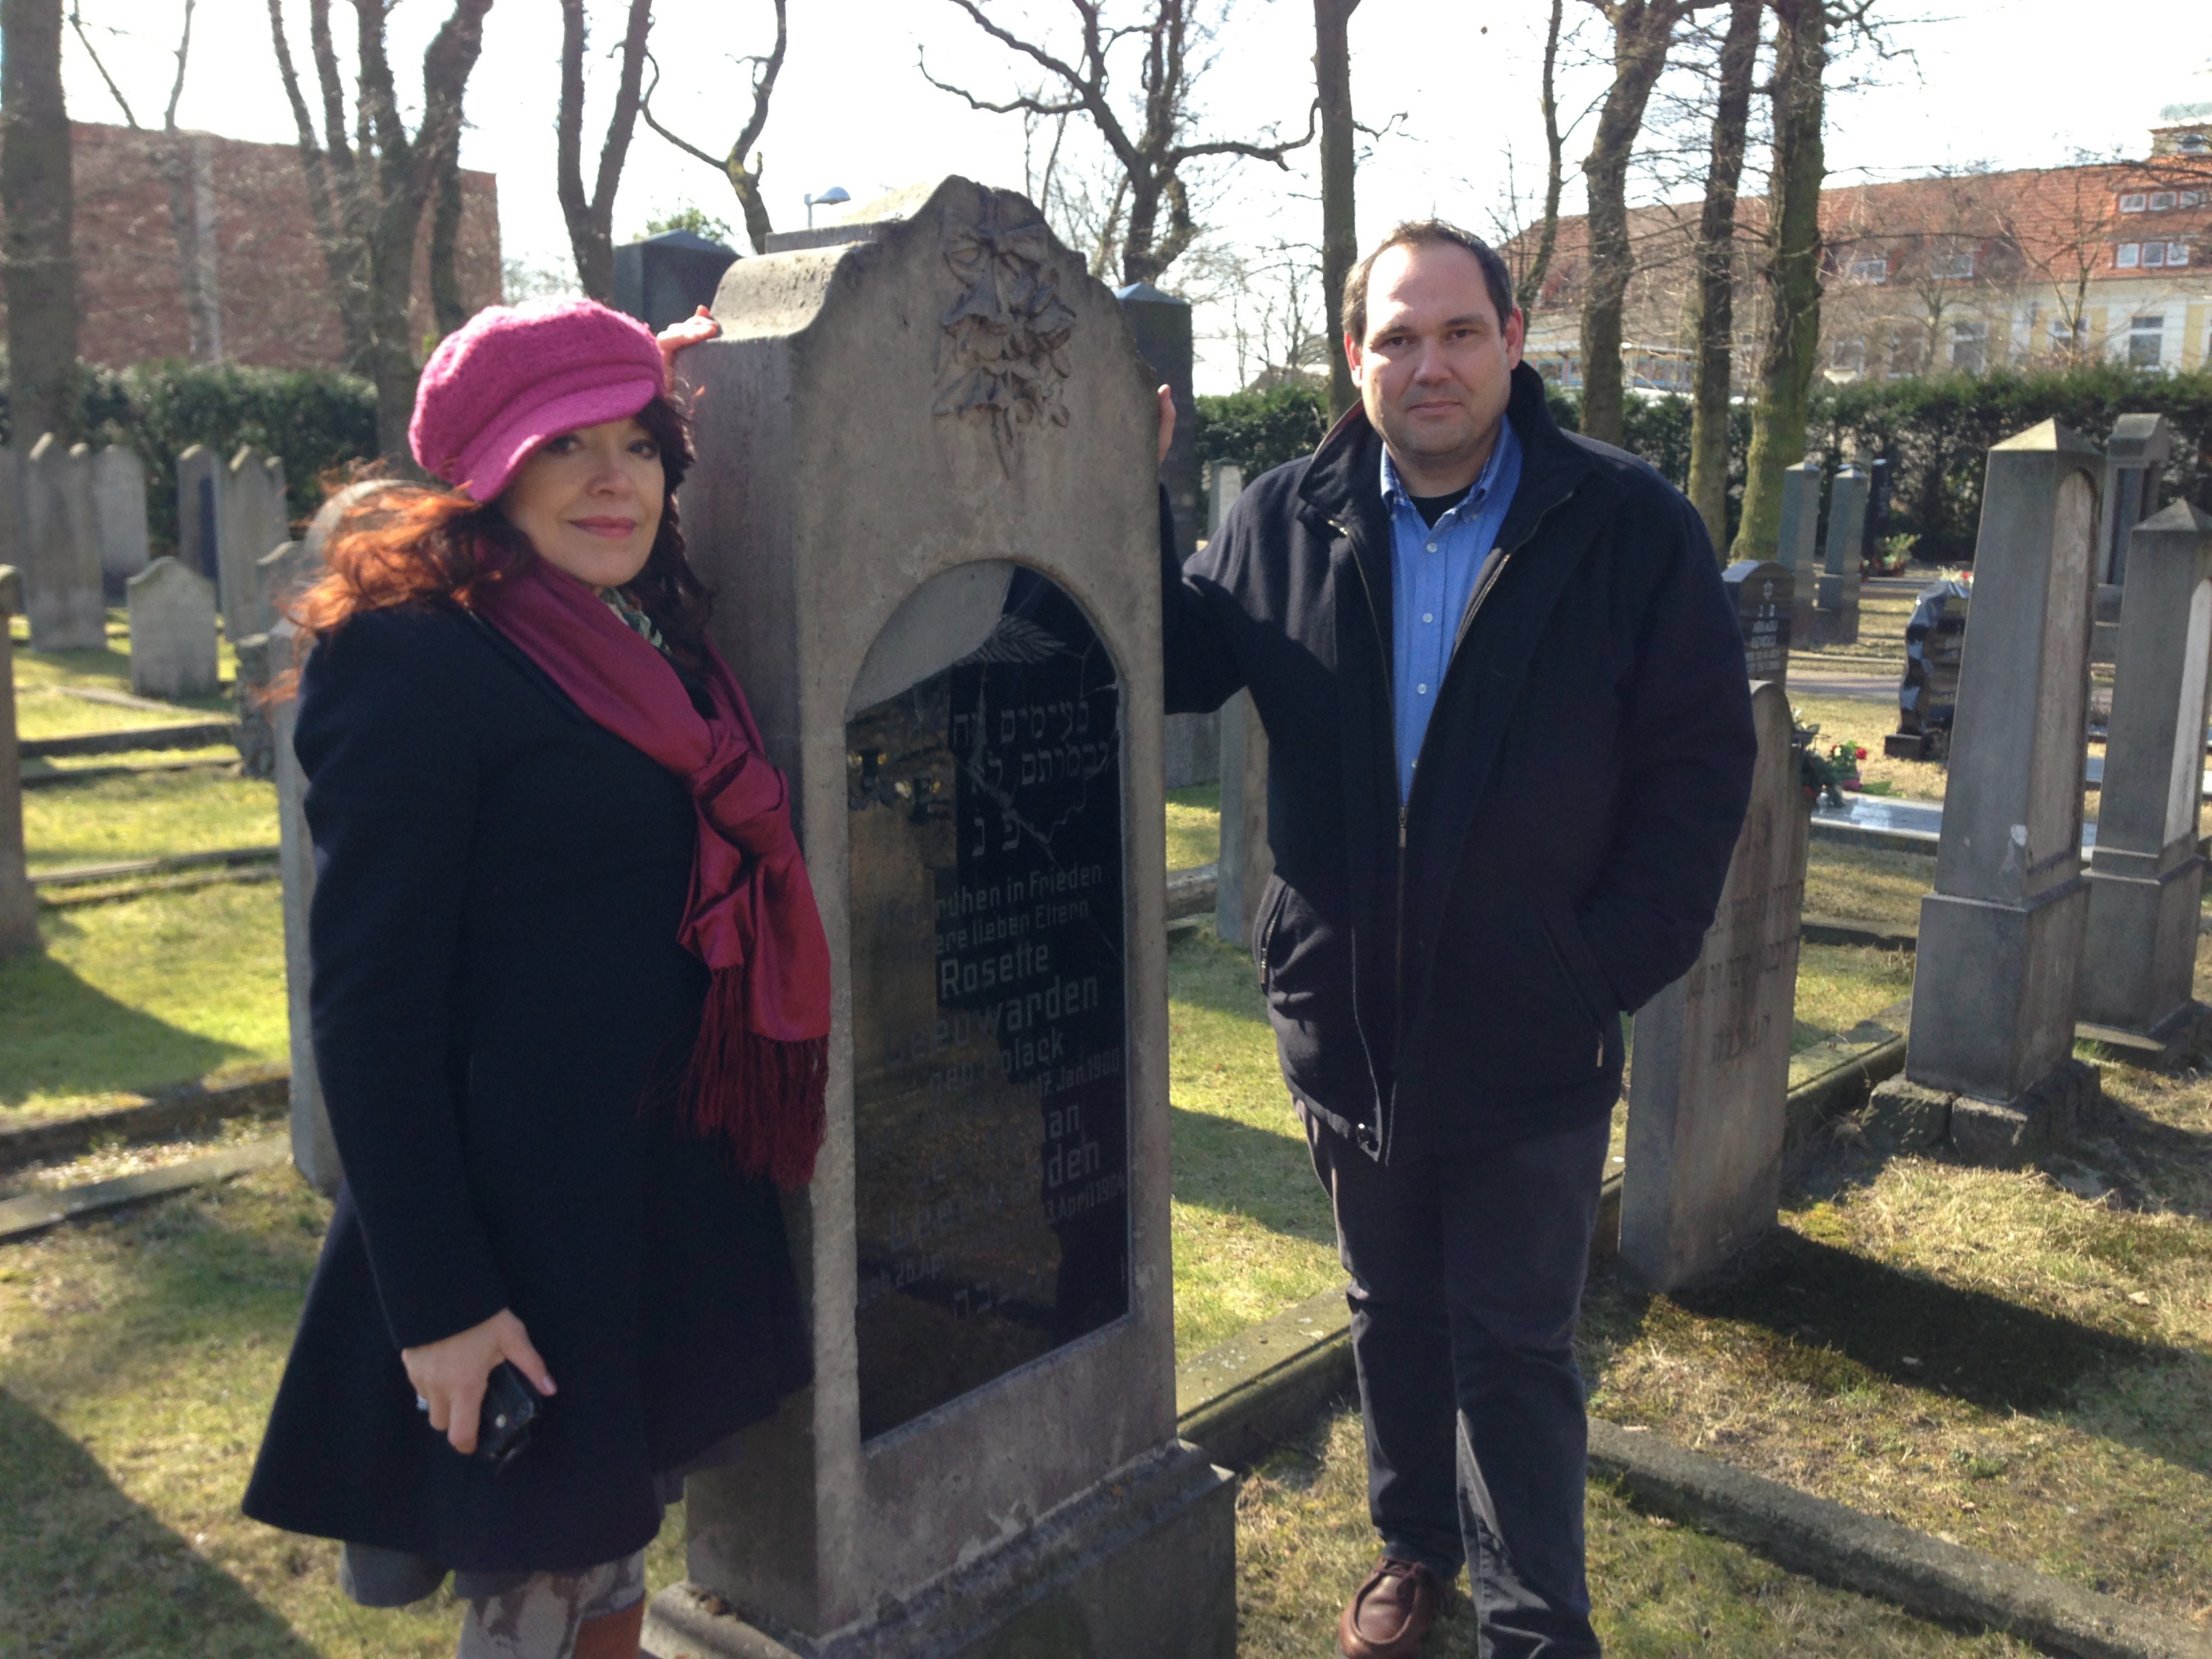 Together with cousin Rosita Steenbeek, visiting Delmenhorst in 2013.